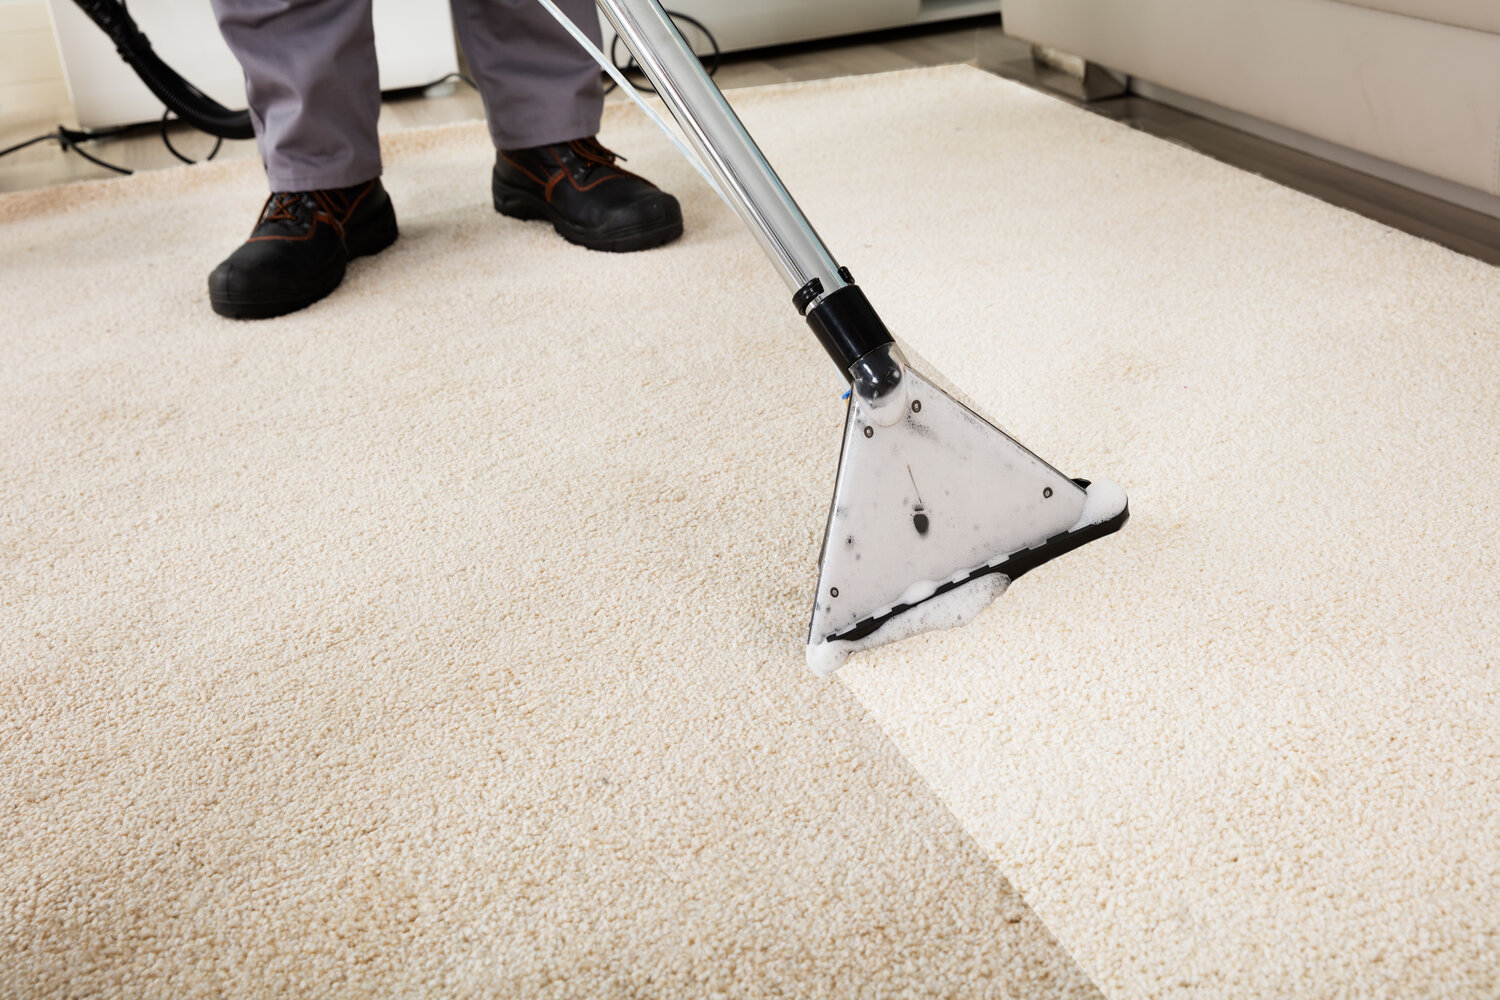 Professional Carpet Cleaning: A Wise Investment for Healthier Living